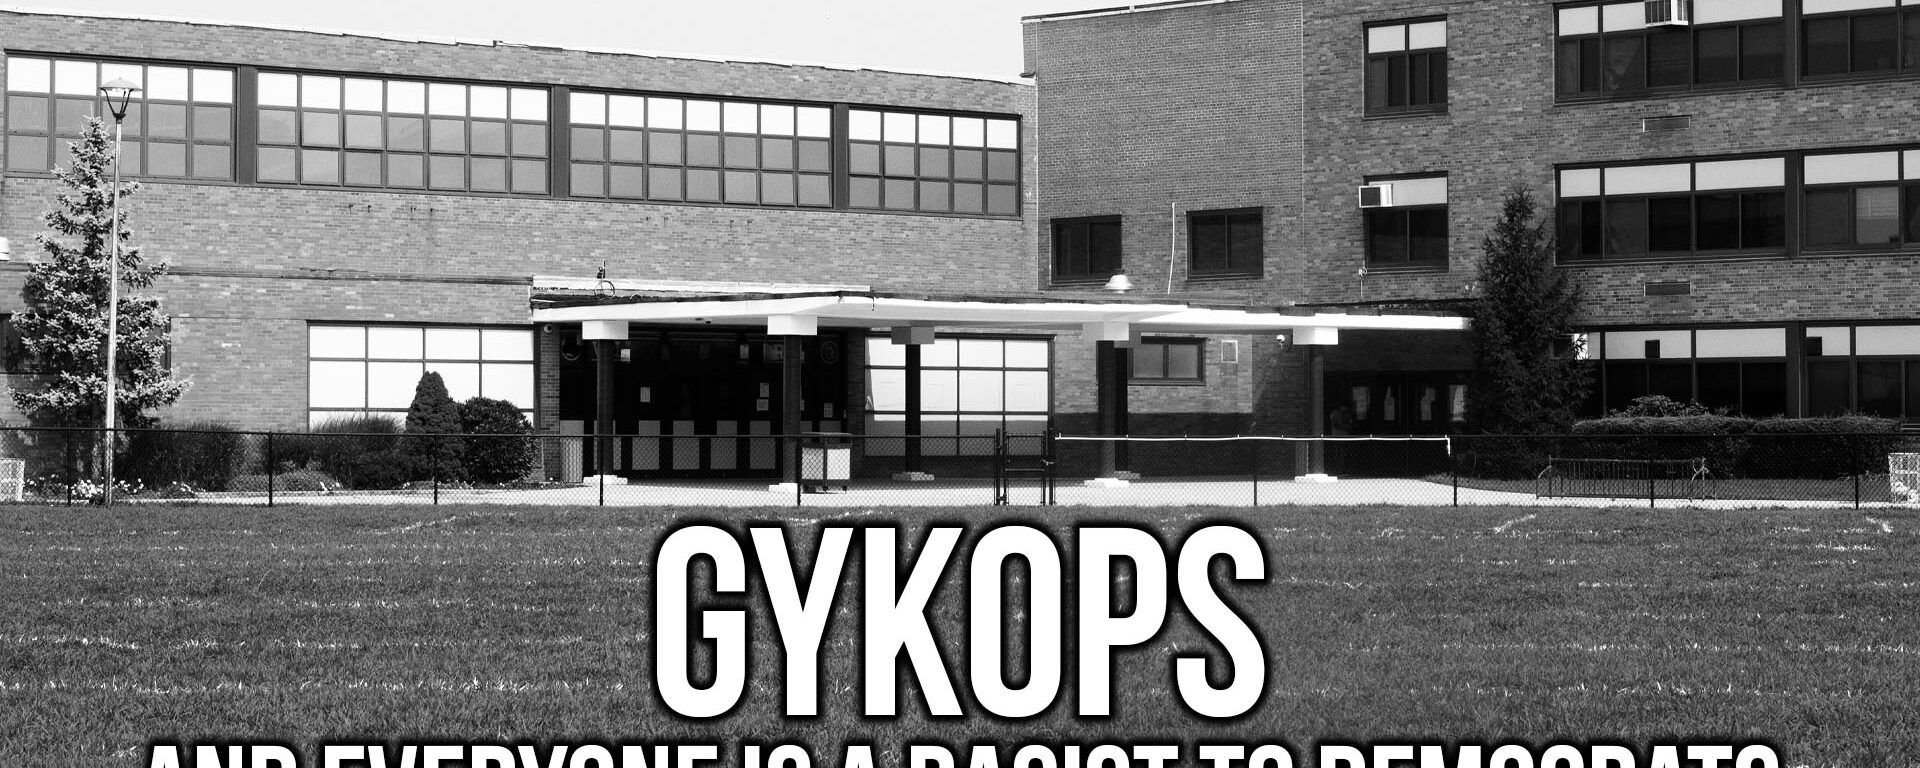 GYKOPS and Everyone is a Racist to Democrats | SOTG 1123 Pt. 3